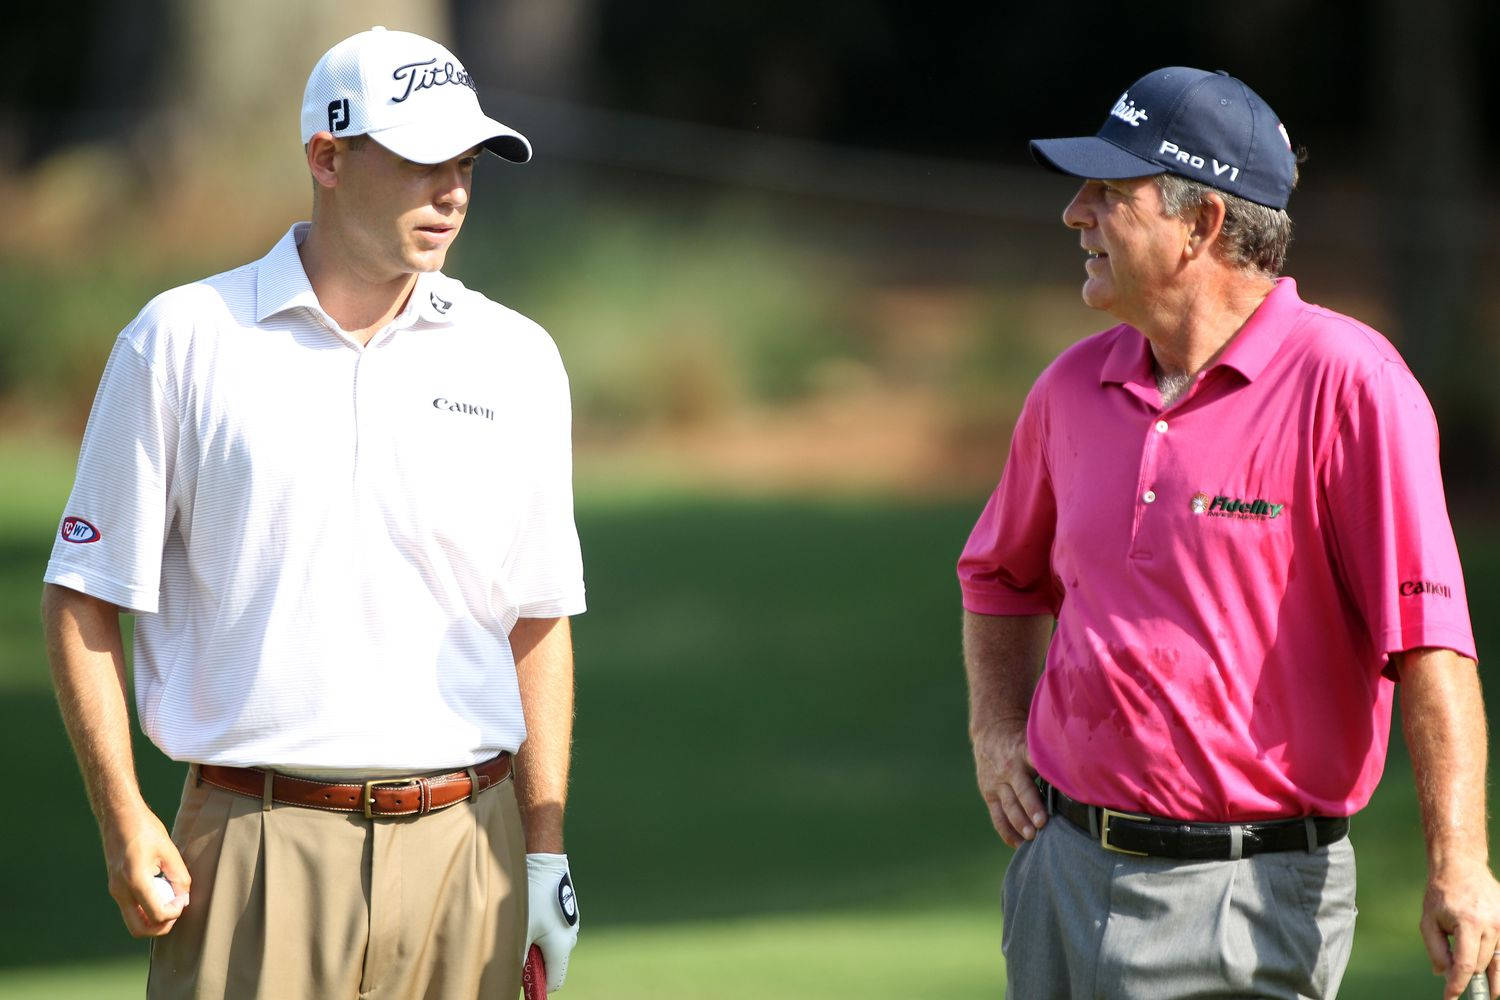 Bill Haas Learning With Coach Wallpaper